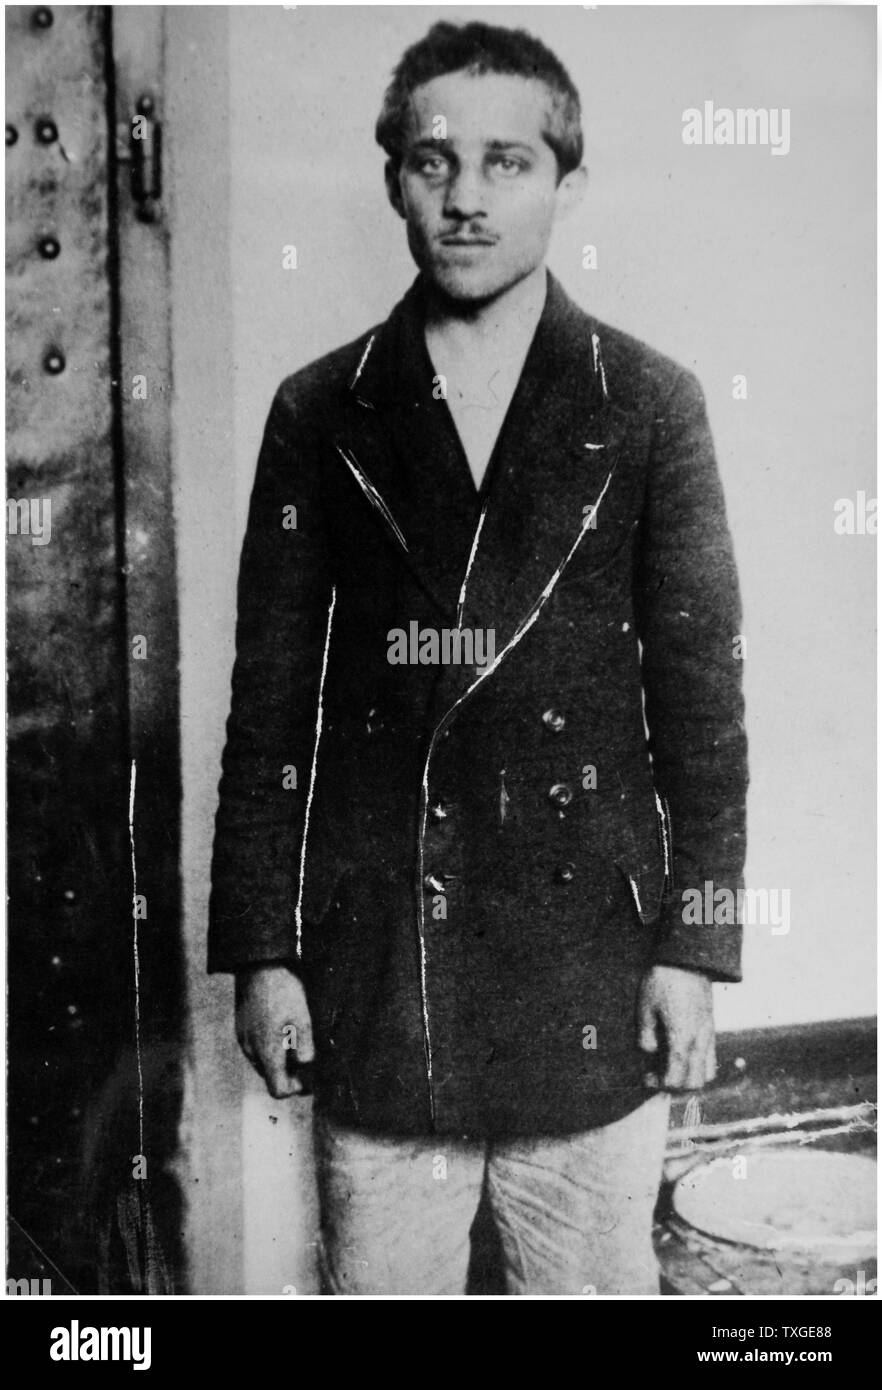 Photograph of Gavrilo Princip (1894-1918) Bosnian Serb who assassinated Archduke Franz Ferdinand of Austria and his wife, Sophie, Duchess of Hohenberg, in Sarajevo on 28 June 1914 Stock Photo